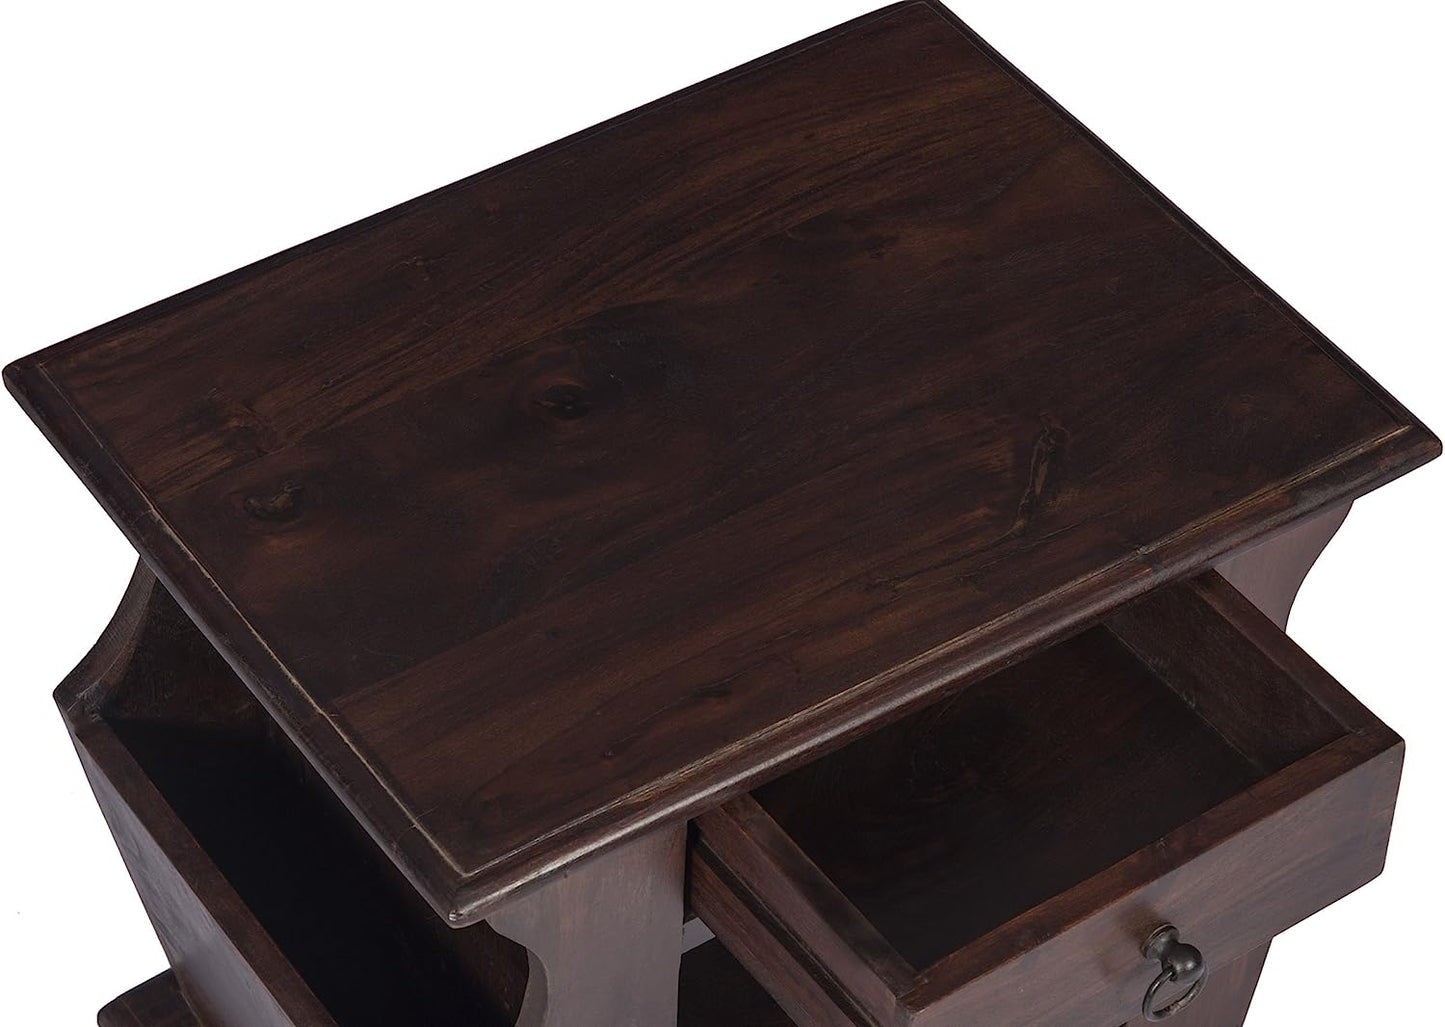 top view of dark brown side table made of sheesham wood with one drawer two shelves and two magazine holders on sides 